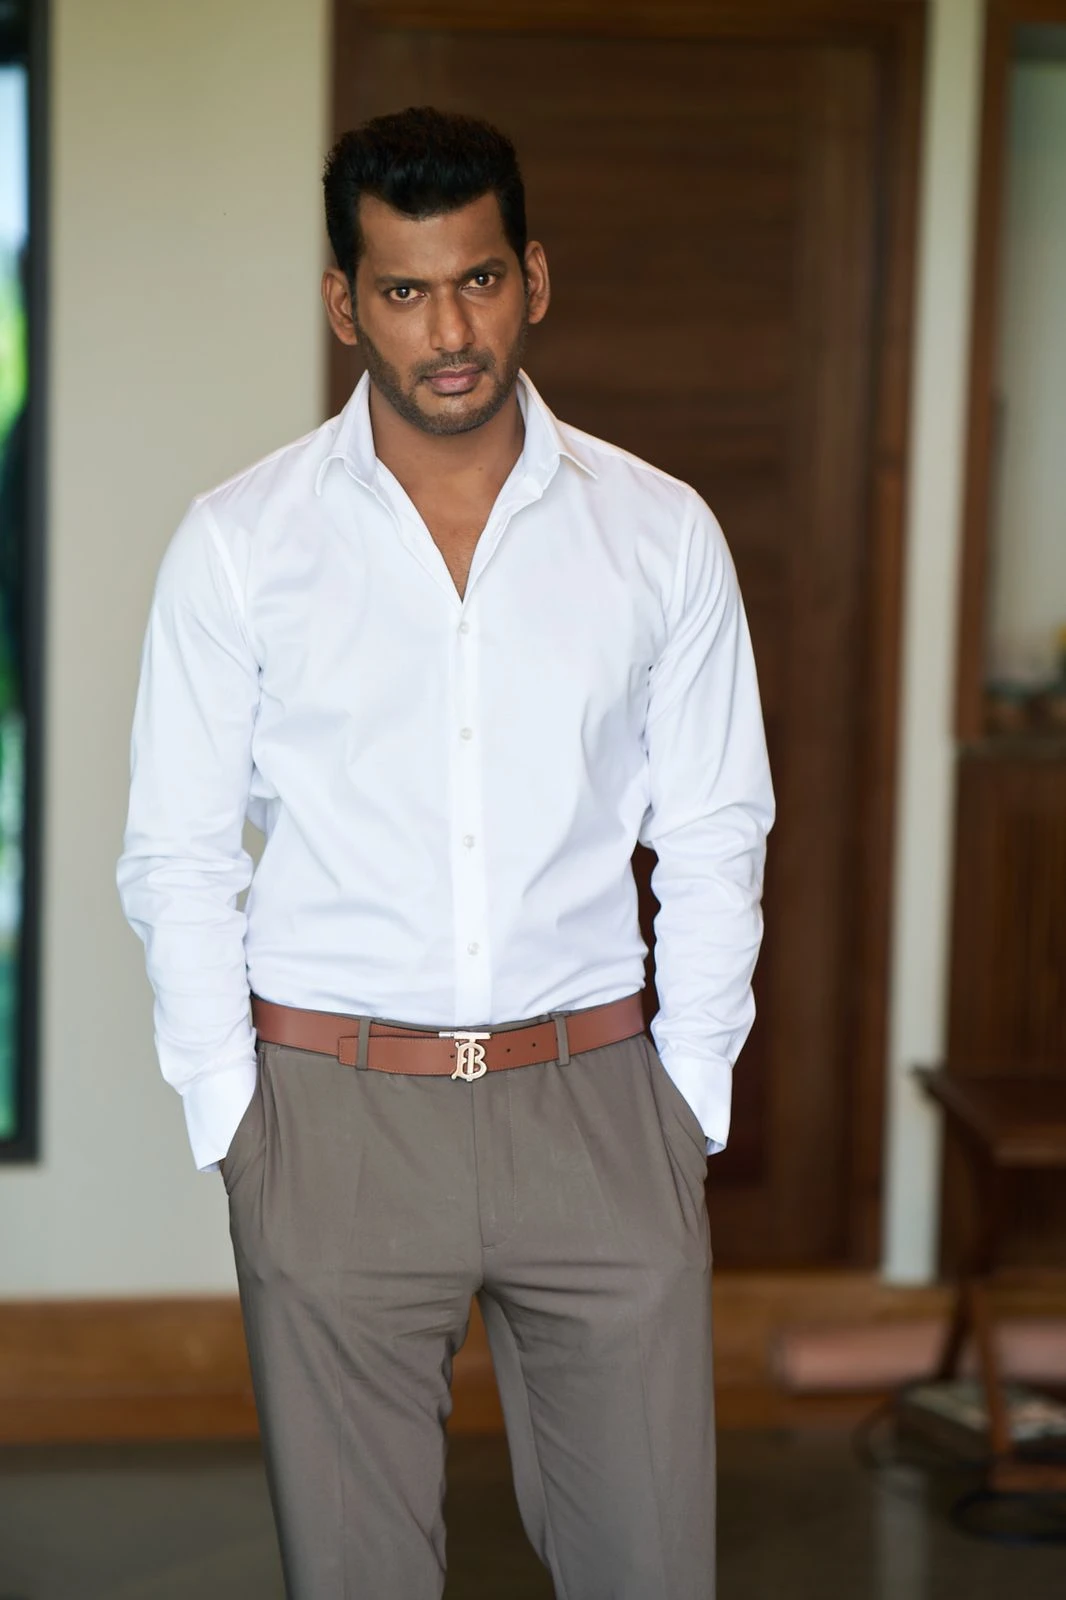 Marriage is an important aspect in one’s life & I am happy to be getting eleven couples married – Actor Vishal krishna.